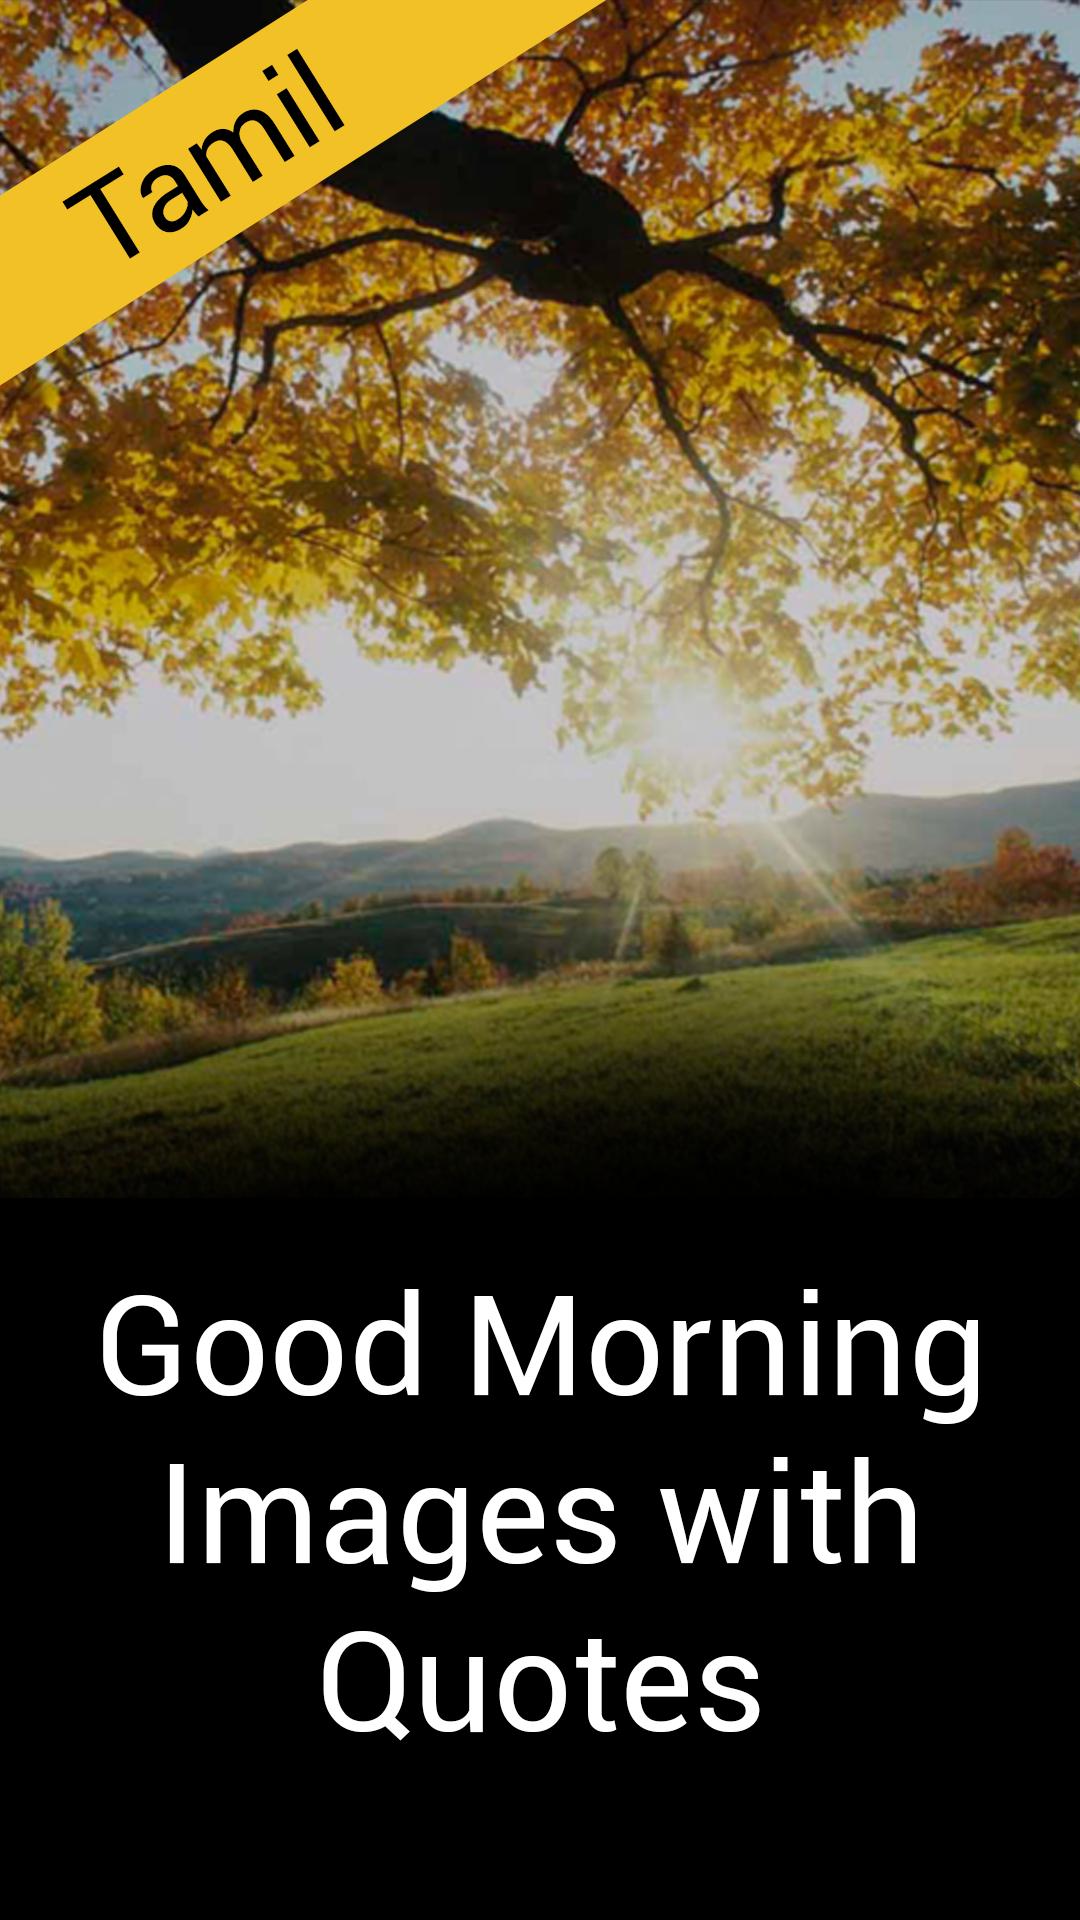 Good Morning Images In Tamil With Quotes For Android Apk Download